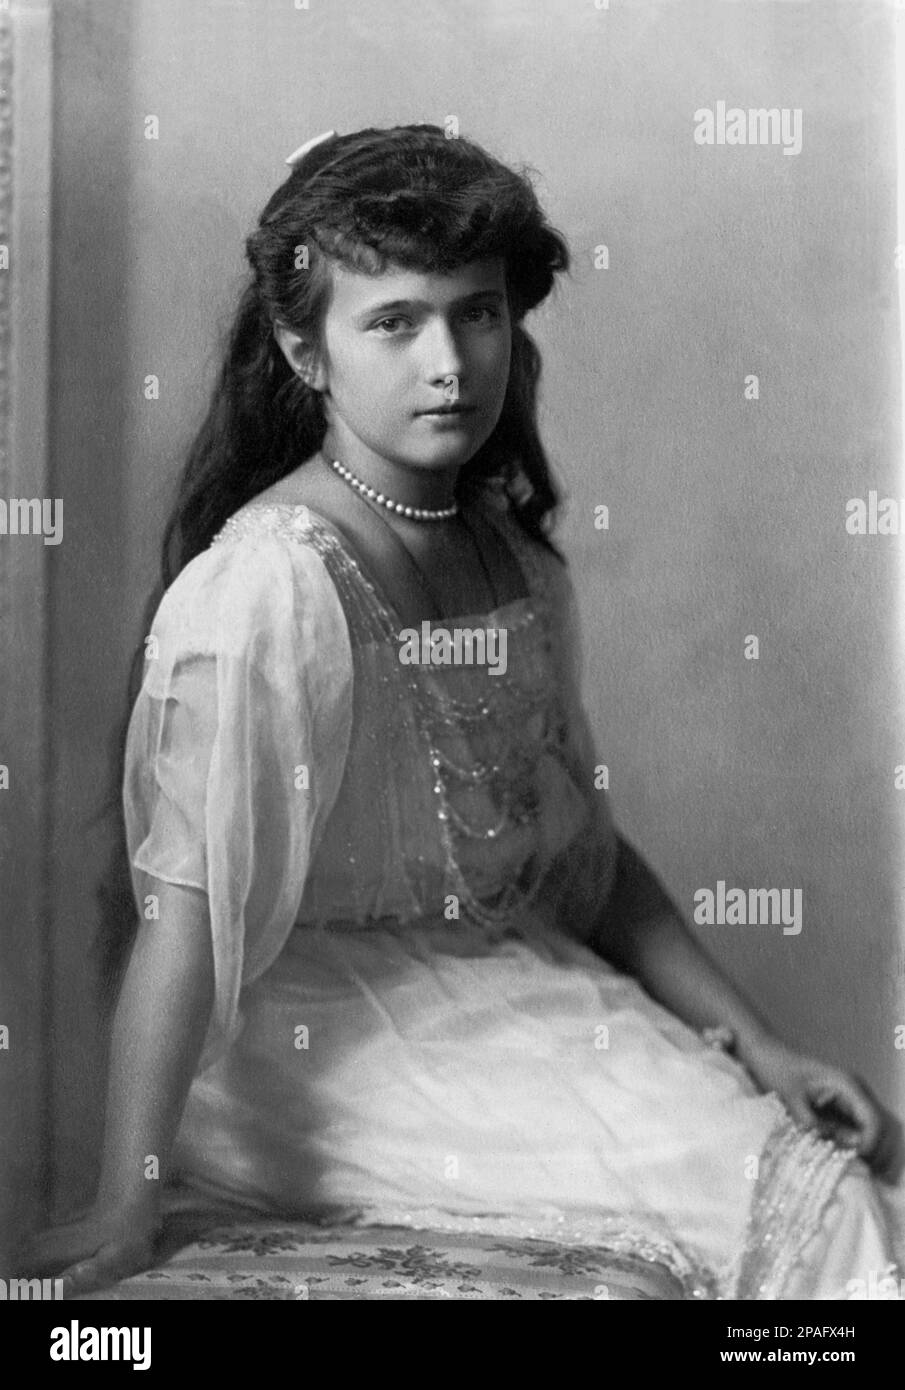 1913 ca : The russian Her Imperial Highness Grand Duchess  ANASTASIA  ROMANOV ( 1901 - 1918 ) ,the youngest  daughter  of Tsar Nicholas II of Russia and Alexandra Fyodorovna . She is presumed to have been murdered with her family on July 17, 1918, by forces of the Bolshevik secret police. However, rumors have persisted of her possible escape since 1918, fueled by reports that two sets of remains, identified as Alexei Nikolaevich, Tsarevich of Russia, and either Anastasia or her elder sister Maria, were missing from a mass grave found near Ekaterinburg and later identified through DNA testing a Stock Photo